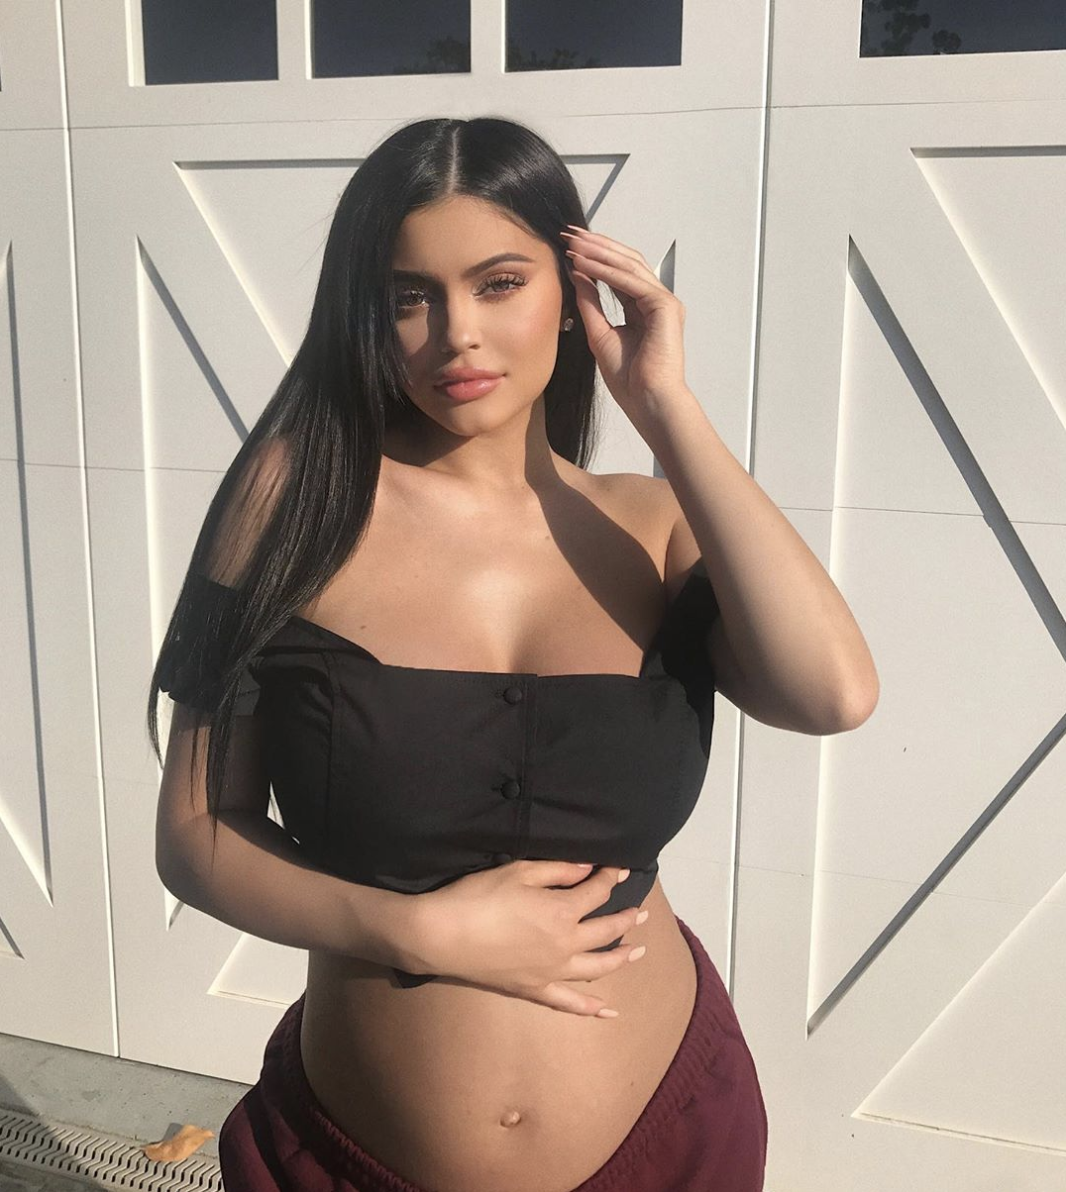 Kylie Jenner and Travis Scott Have Instagram Exchange Before She Posts  Pregnancy Throwback Photo